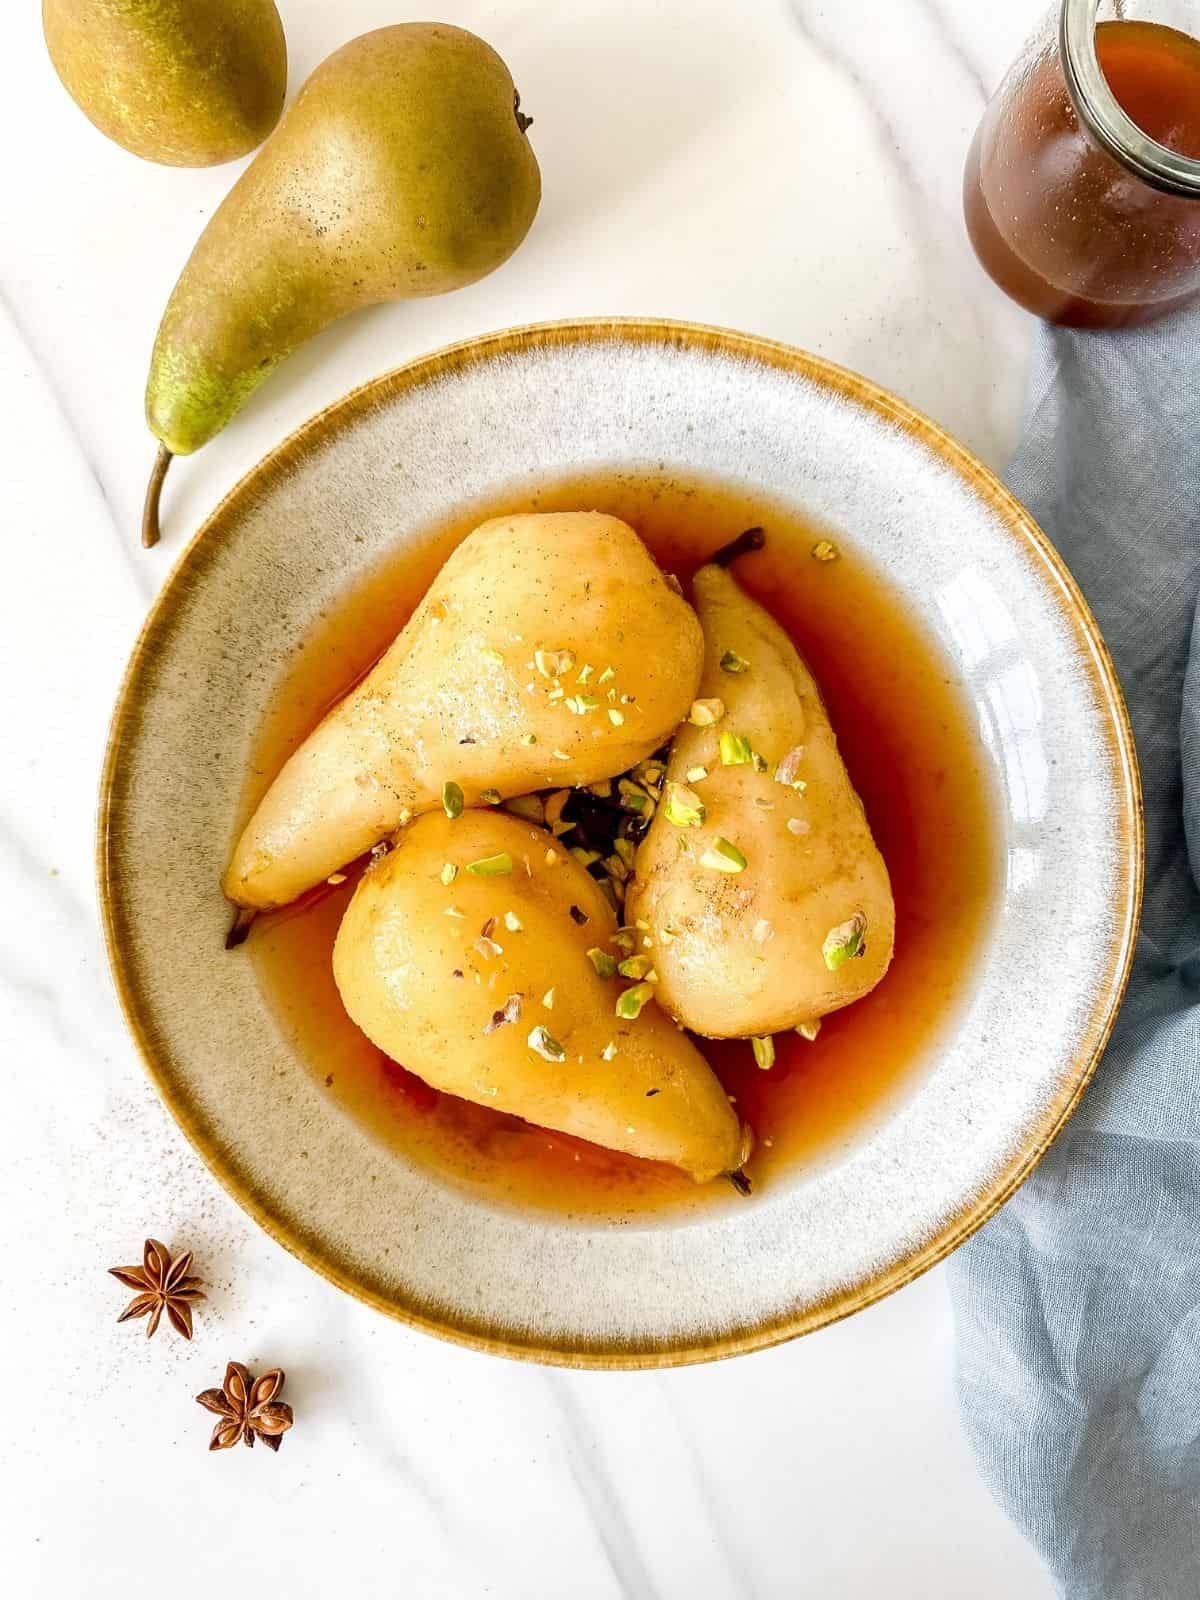 spiced poached pears in a light grey bowl on a blue cloth next to star anise.